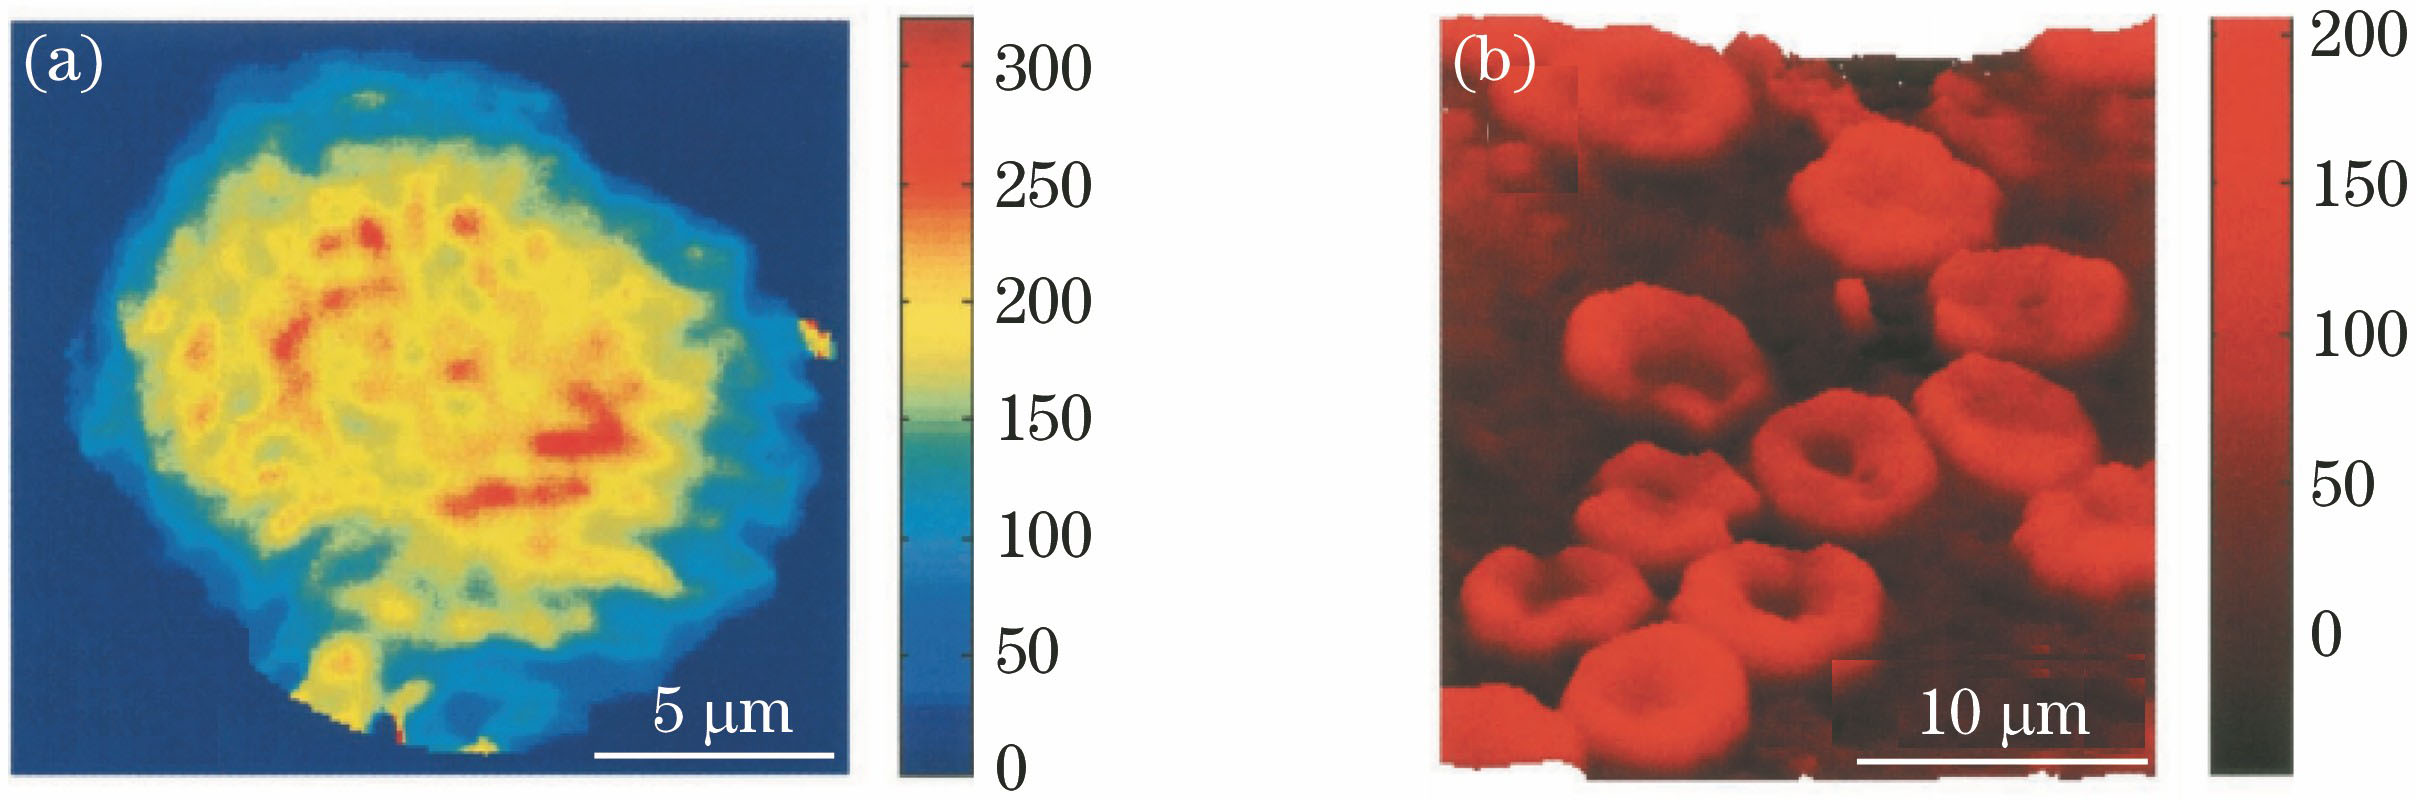 Phase images of (a) Hela cell and (b) batch of red blood cells[8]